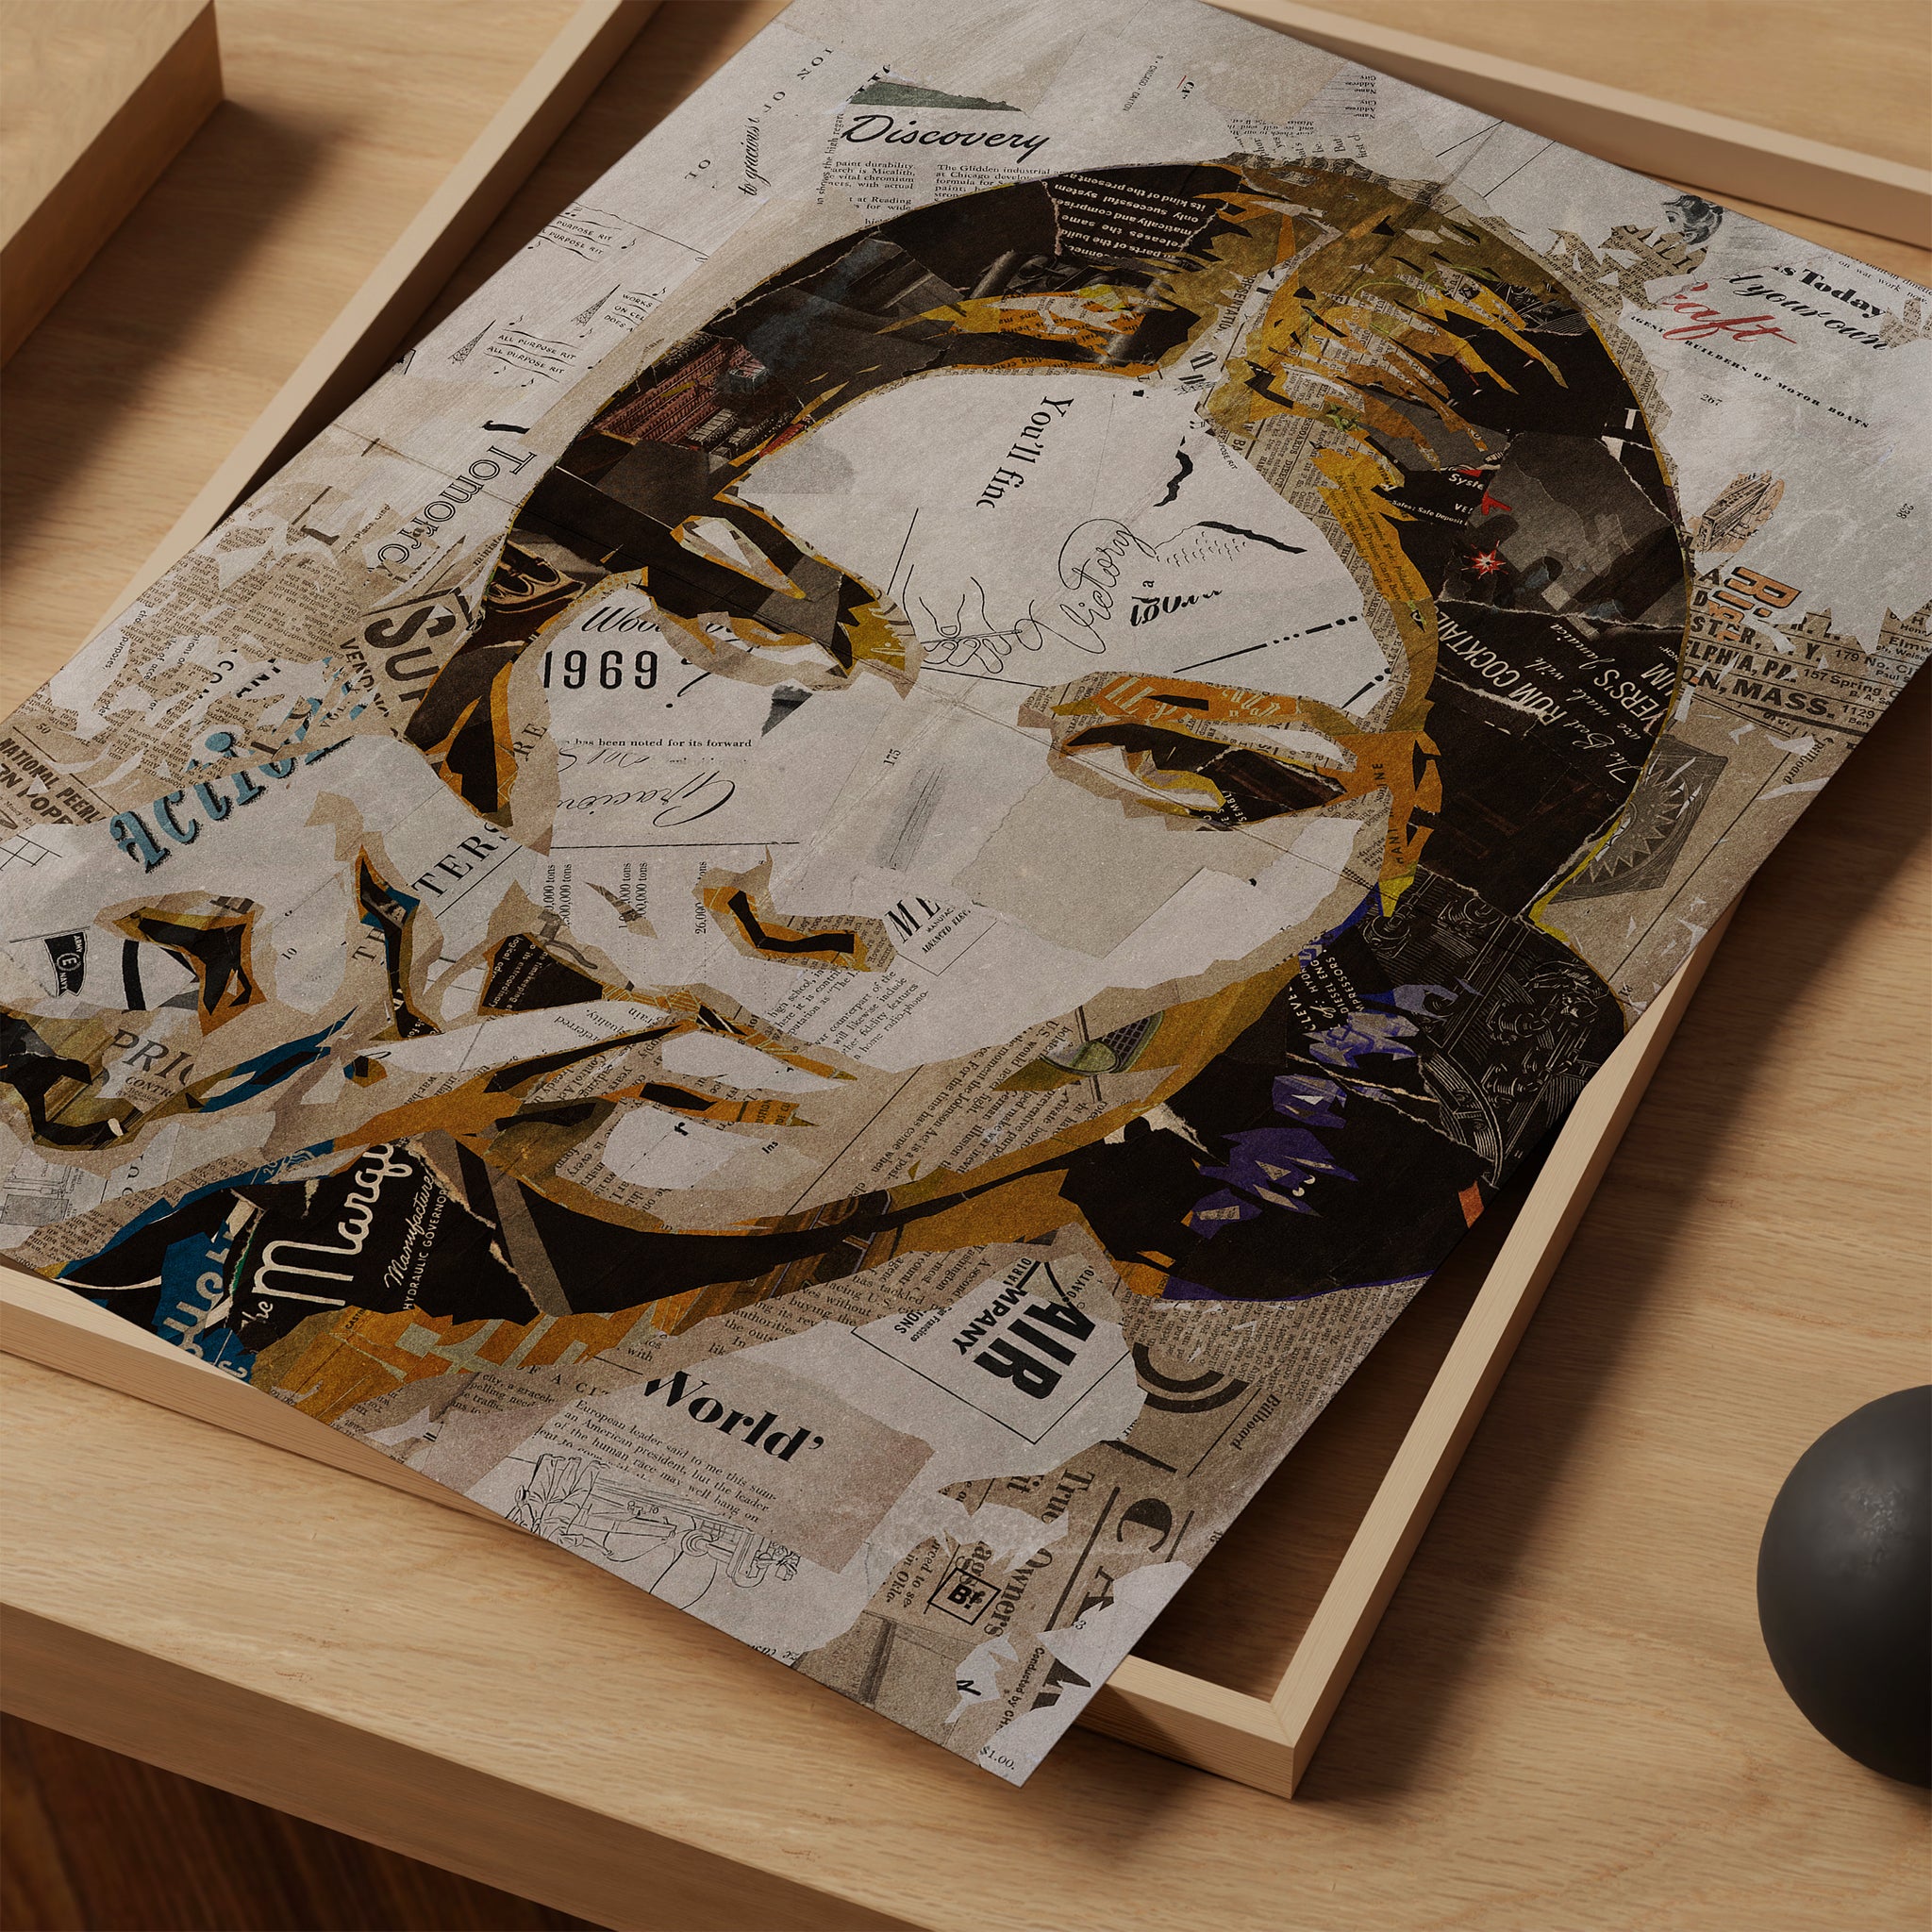 Be inspired by our iconic collage portrait art print of Carla Bruni. This artwork was printed using the giclée process on archival acid-free paper and is presented as a print close-up, capturing its timeless beauty in every detail.